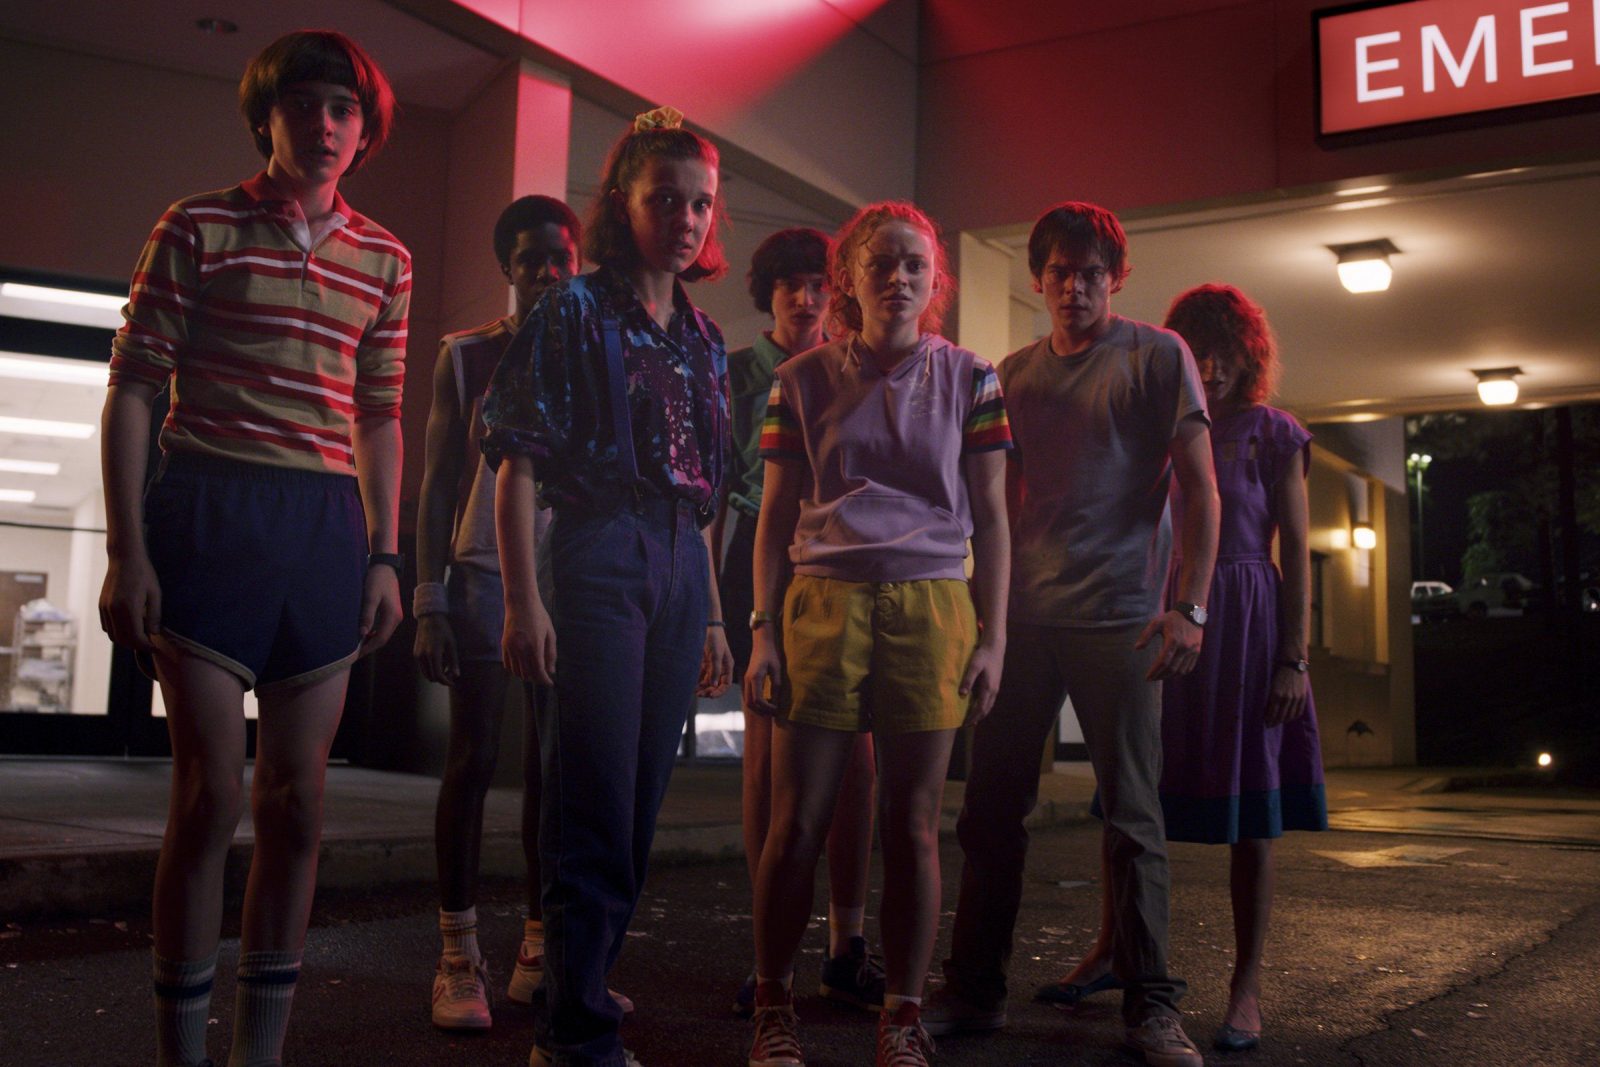 Which Two Stranger Things Characters Are You A Combo Of? Stranger Things season 3